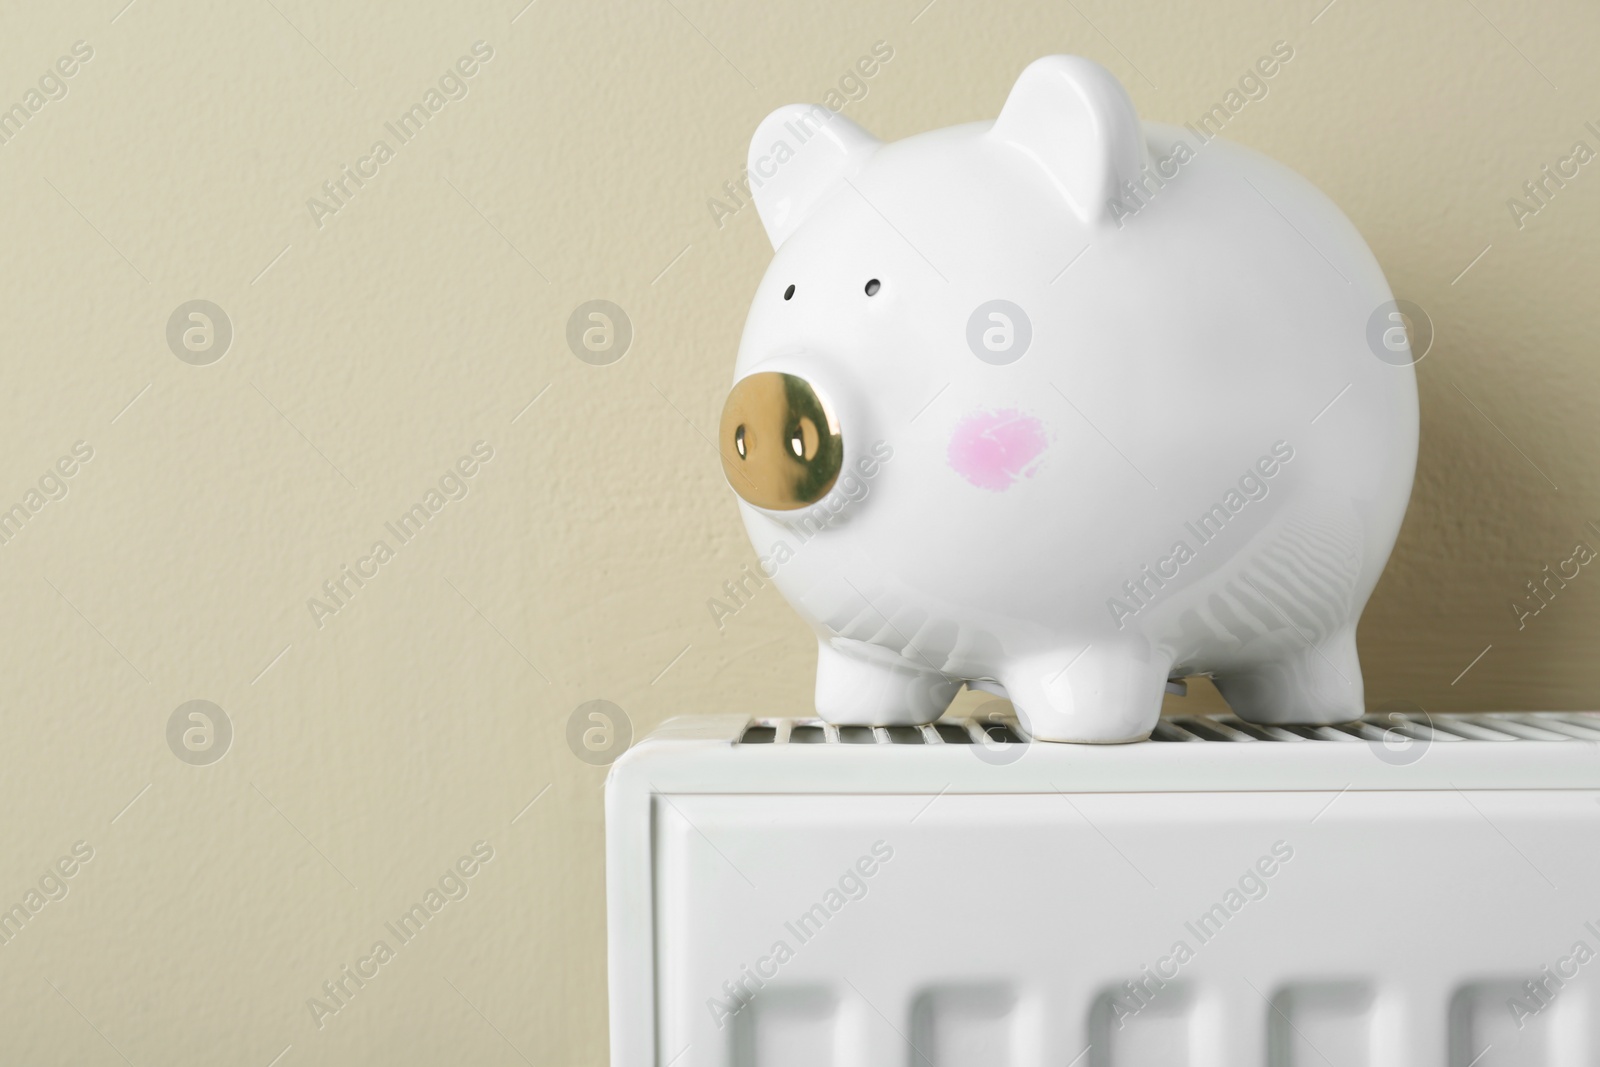 Photo of Piggy bank on heating radiator against beige background, space for text